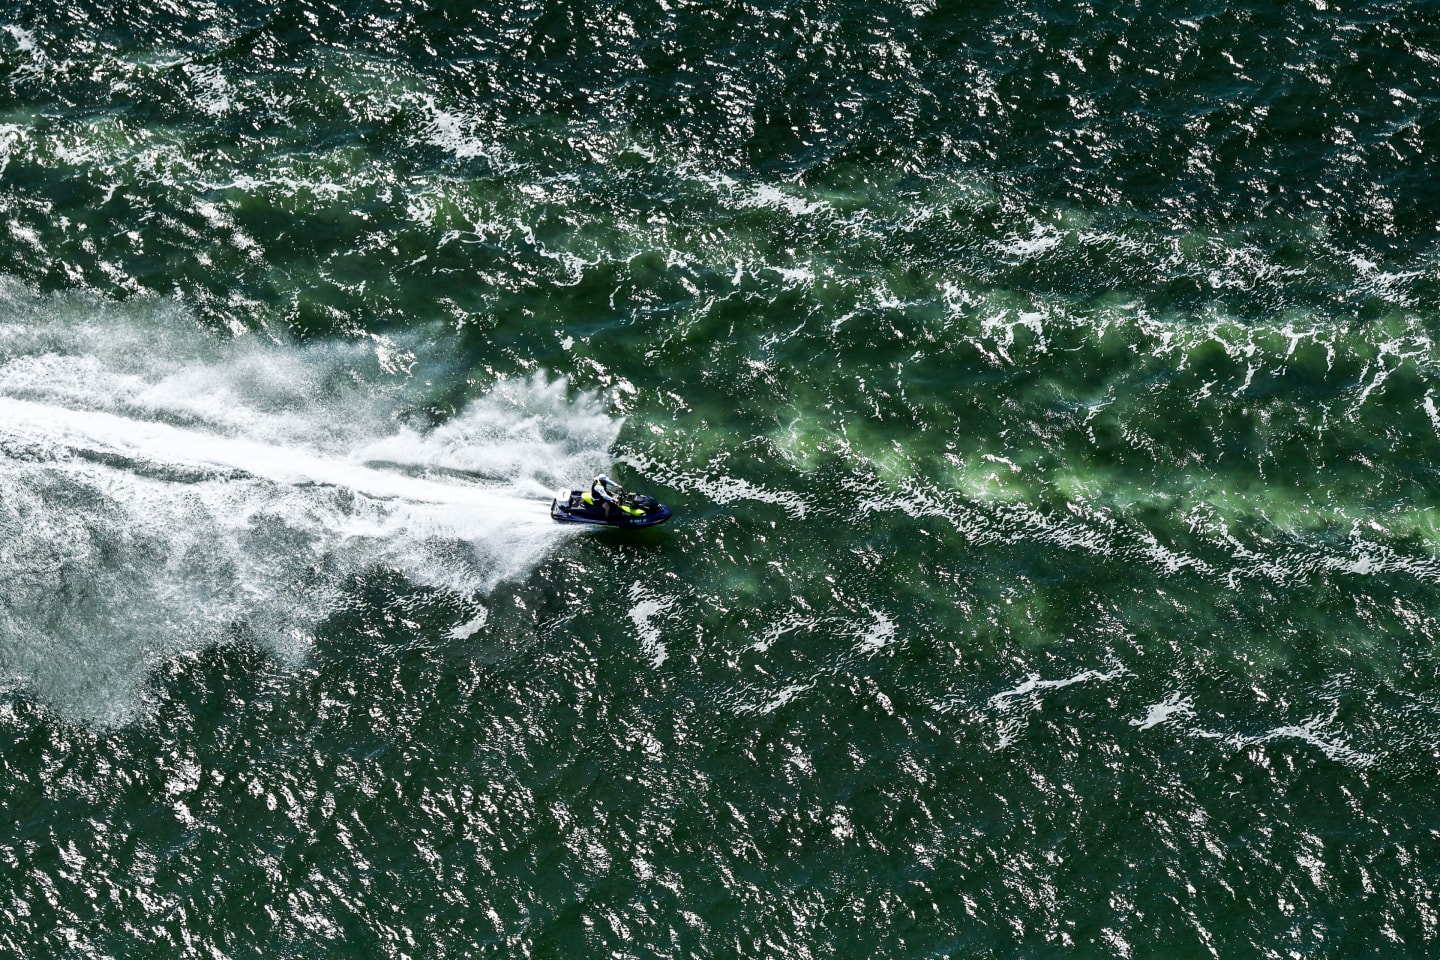 An aerial view of a man riding a jet-ski in the bay of Miami Beach, Florida on June 27, 2021.